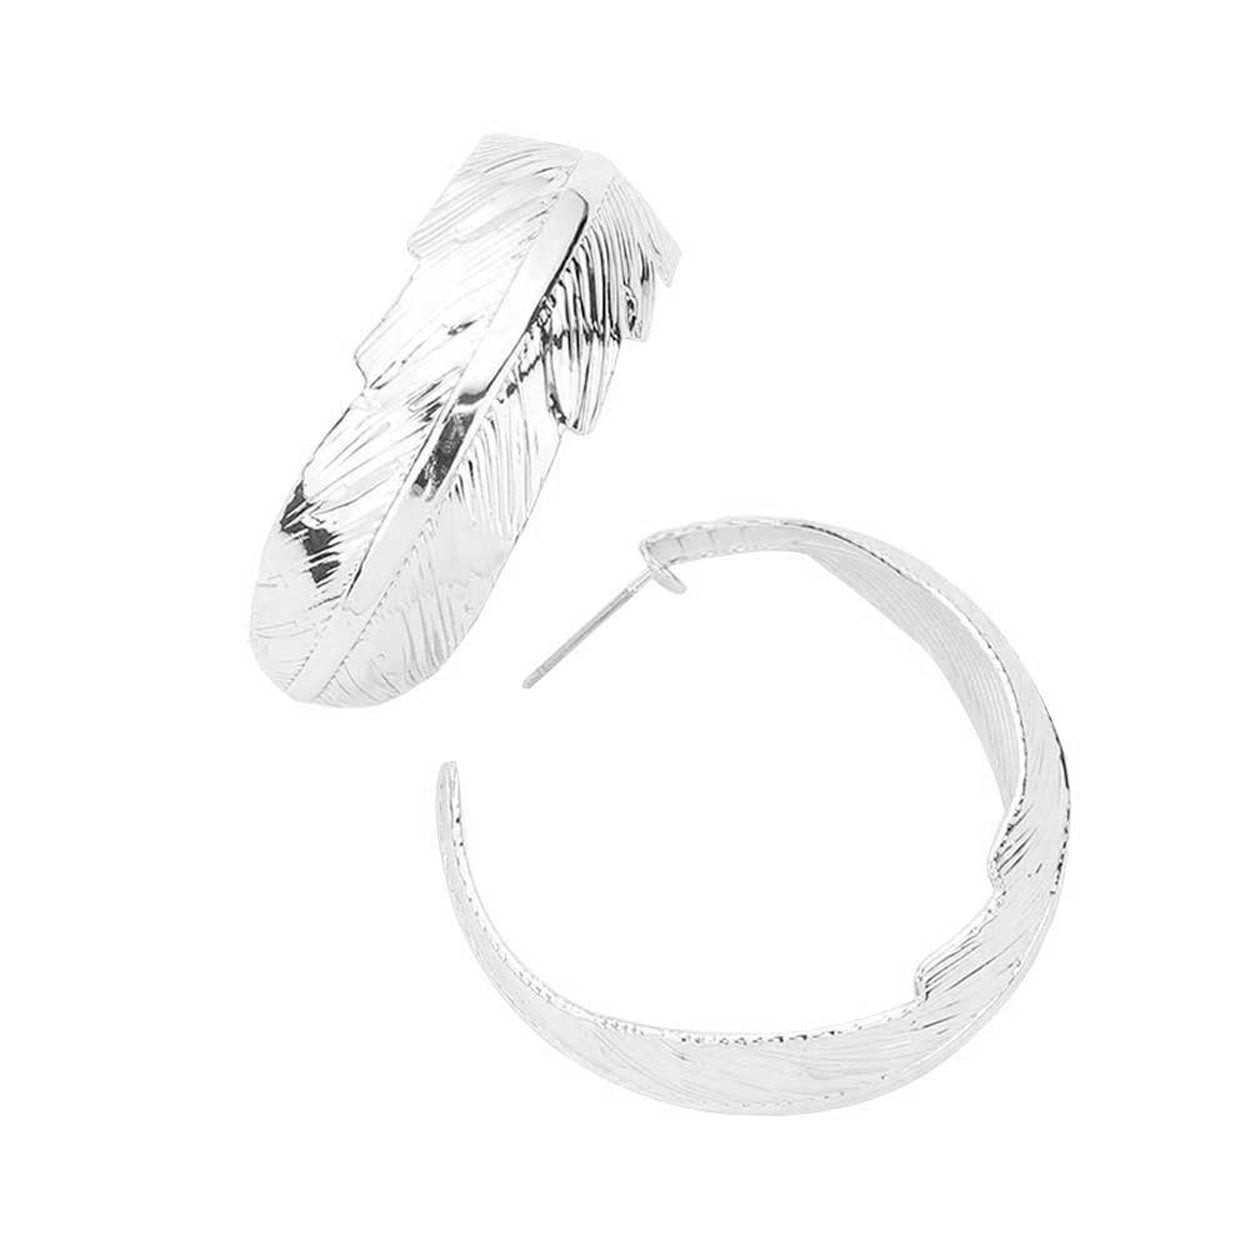 Rhodium Trendy 14K White Gold Dipped Metal Hoop Earrings. Spring is right around the corner, get ready with these bright hoop back metal earrings, add a pop of color to your ensemble. Perfect Birthday Gift, Anniversary Gift, Loved One Gift, Mother's Day Gift, Anniversary Gift, Graduation Gift. Make the women in your life feel special.